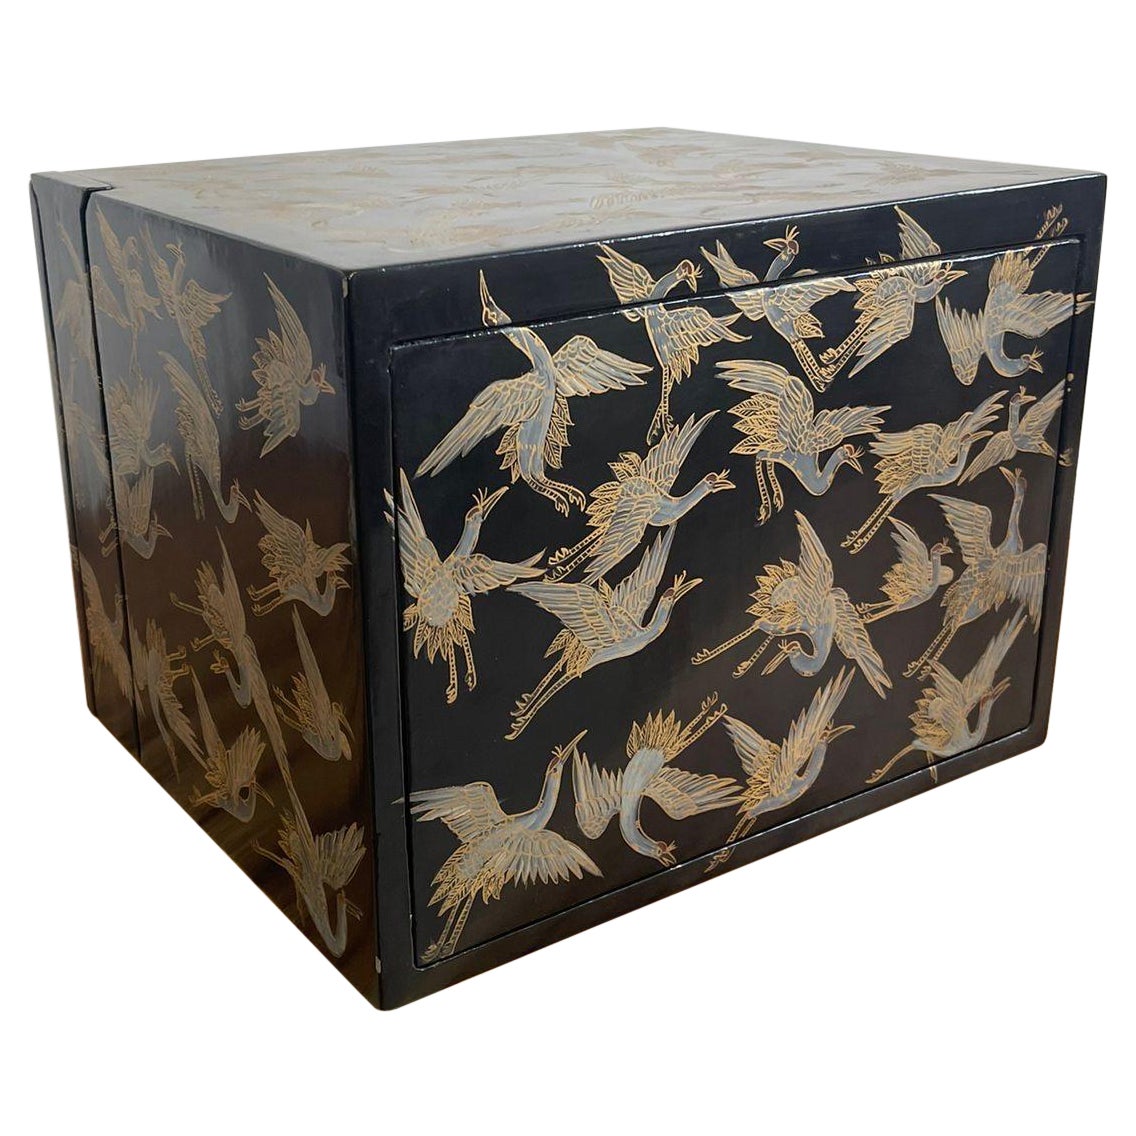 Japanese Storage Box With Hidden Compartments and Crane Motif. For Sale